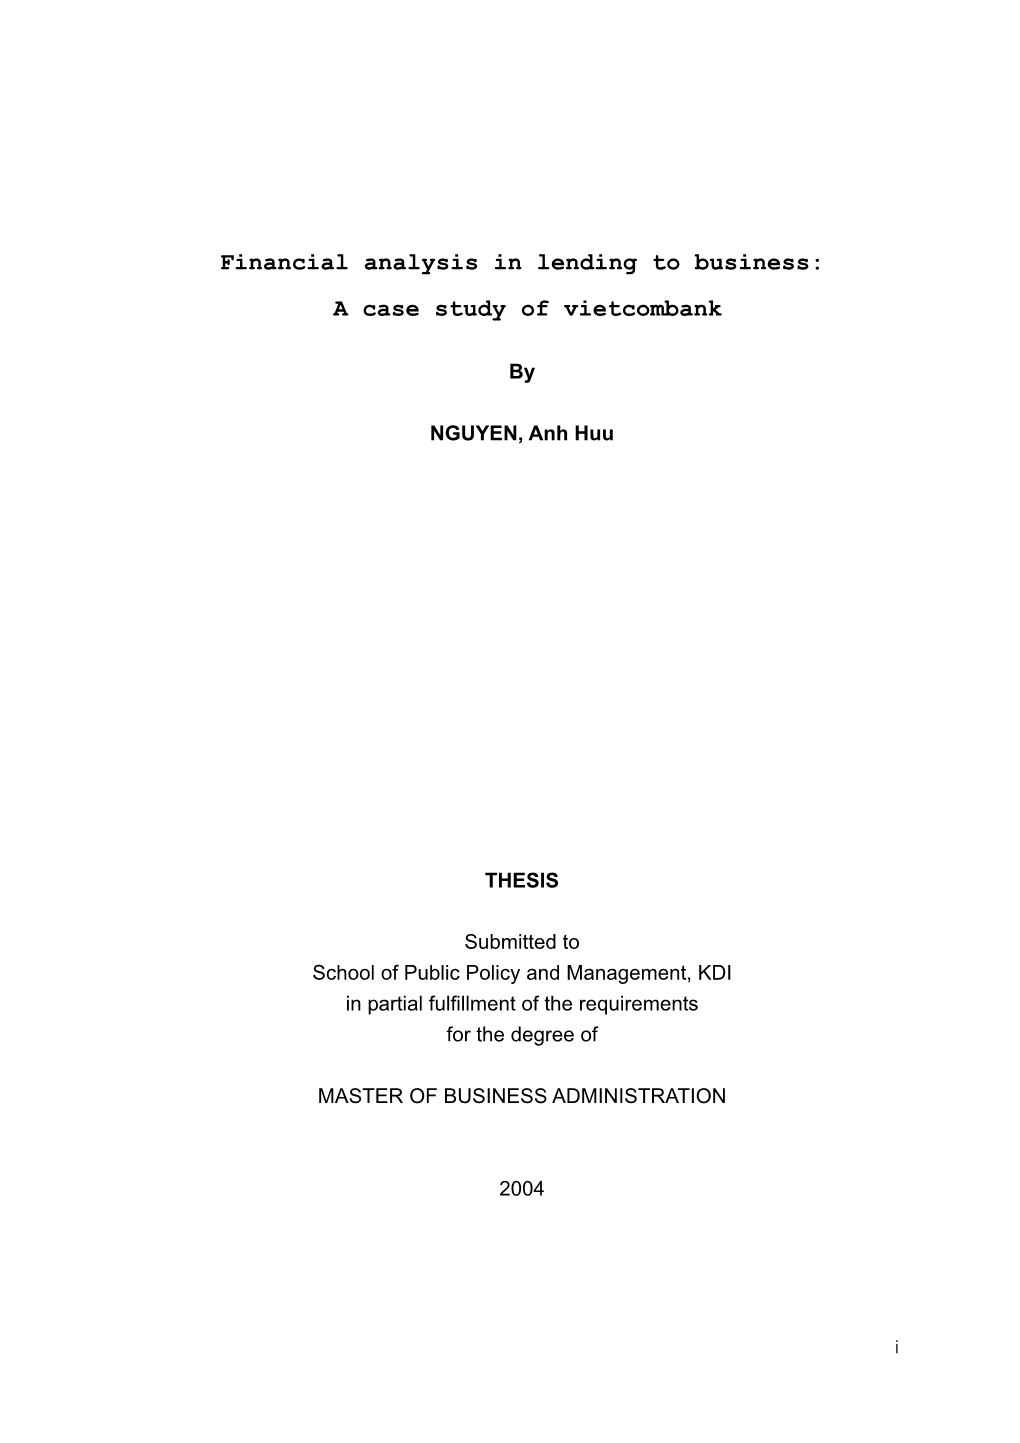 Financial Analysis in Lending to Business: a Case Study of Vietcombank